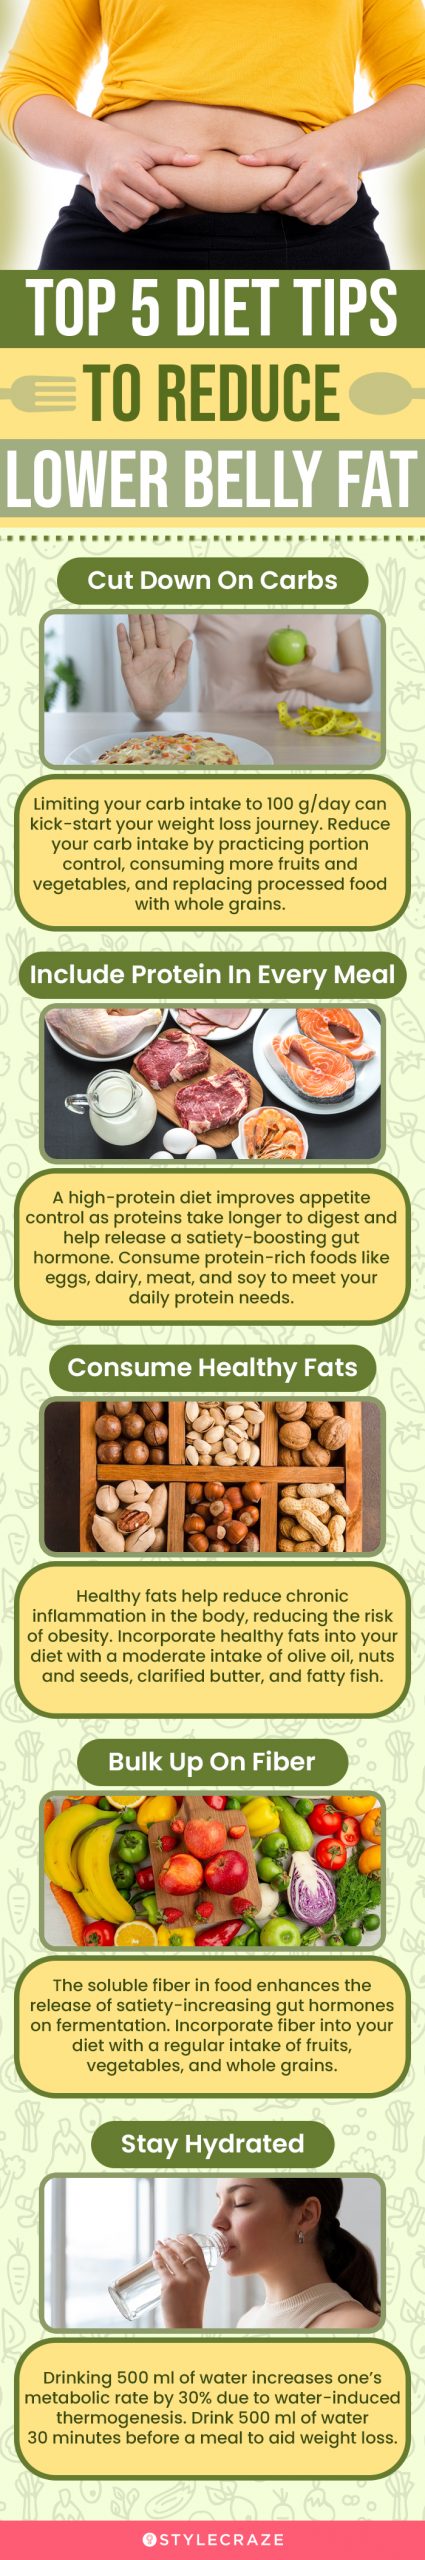 top 5 diet tips to reduce lower belly fat (infographic)